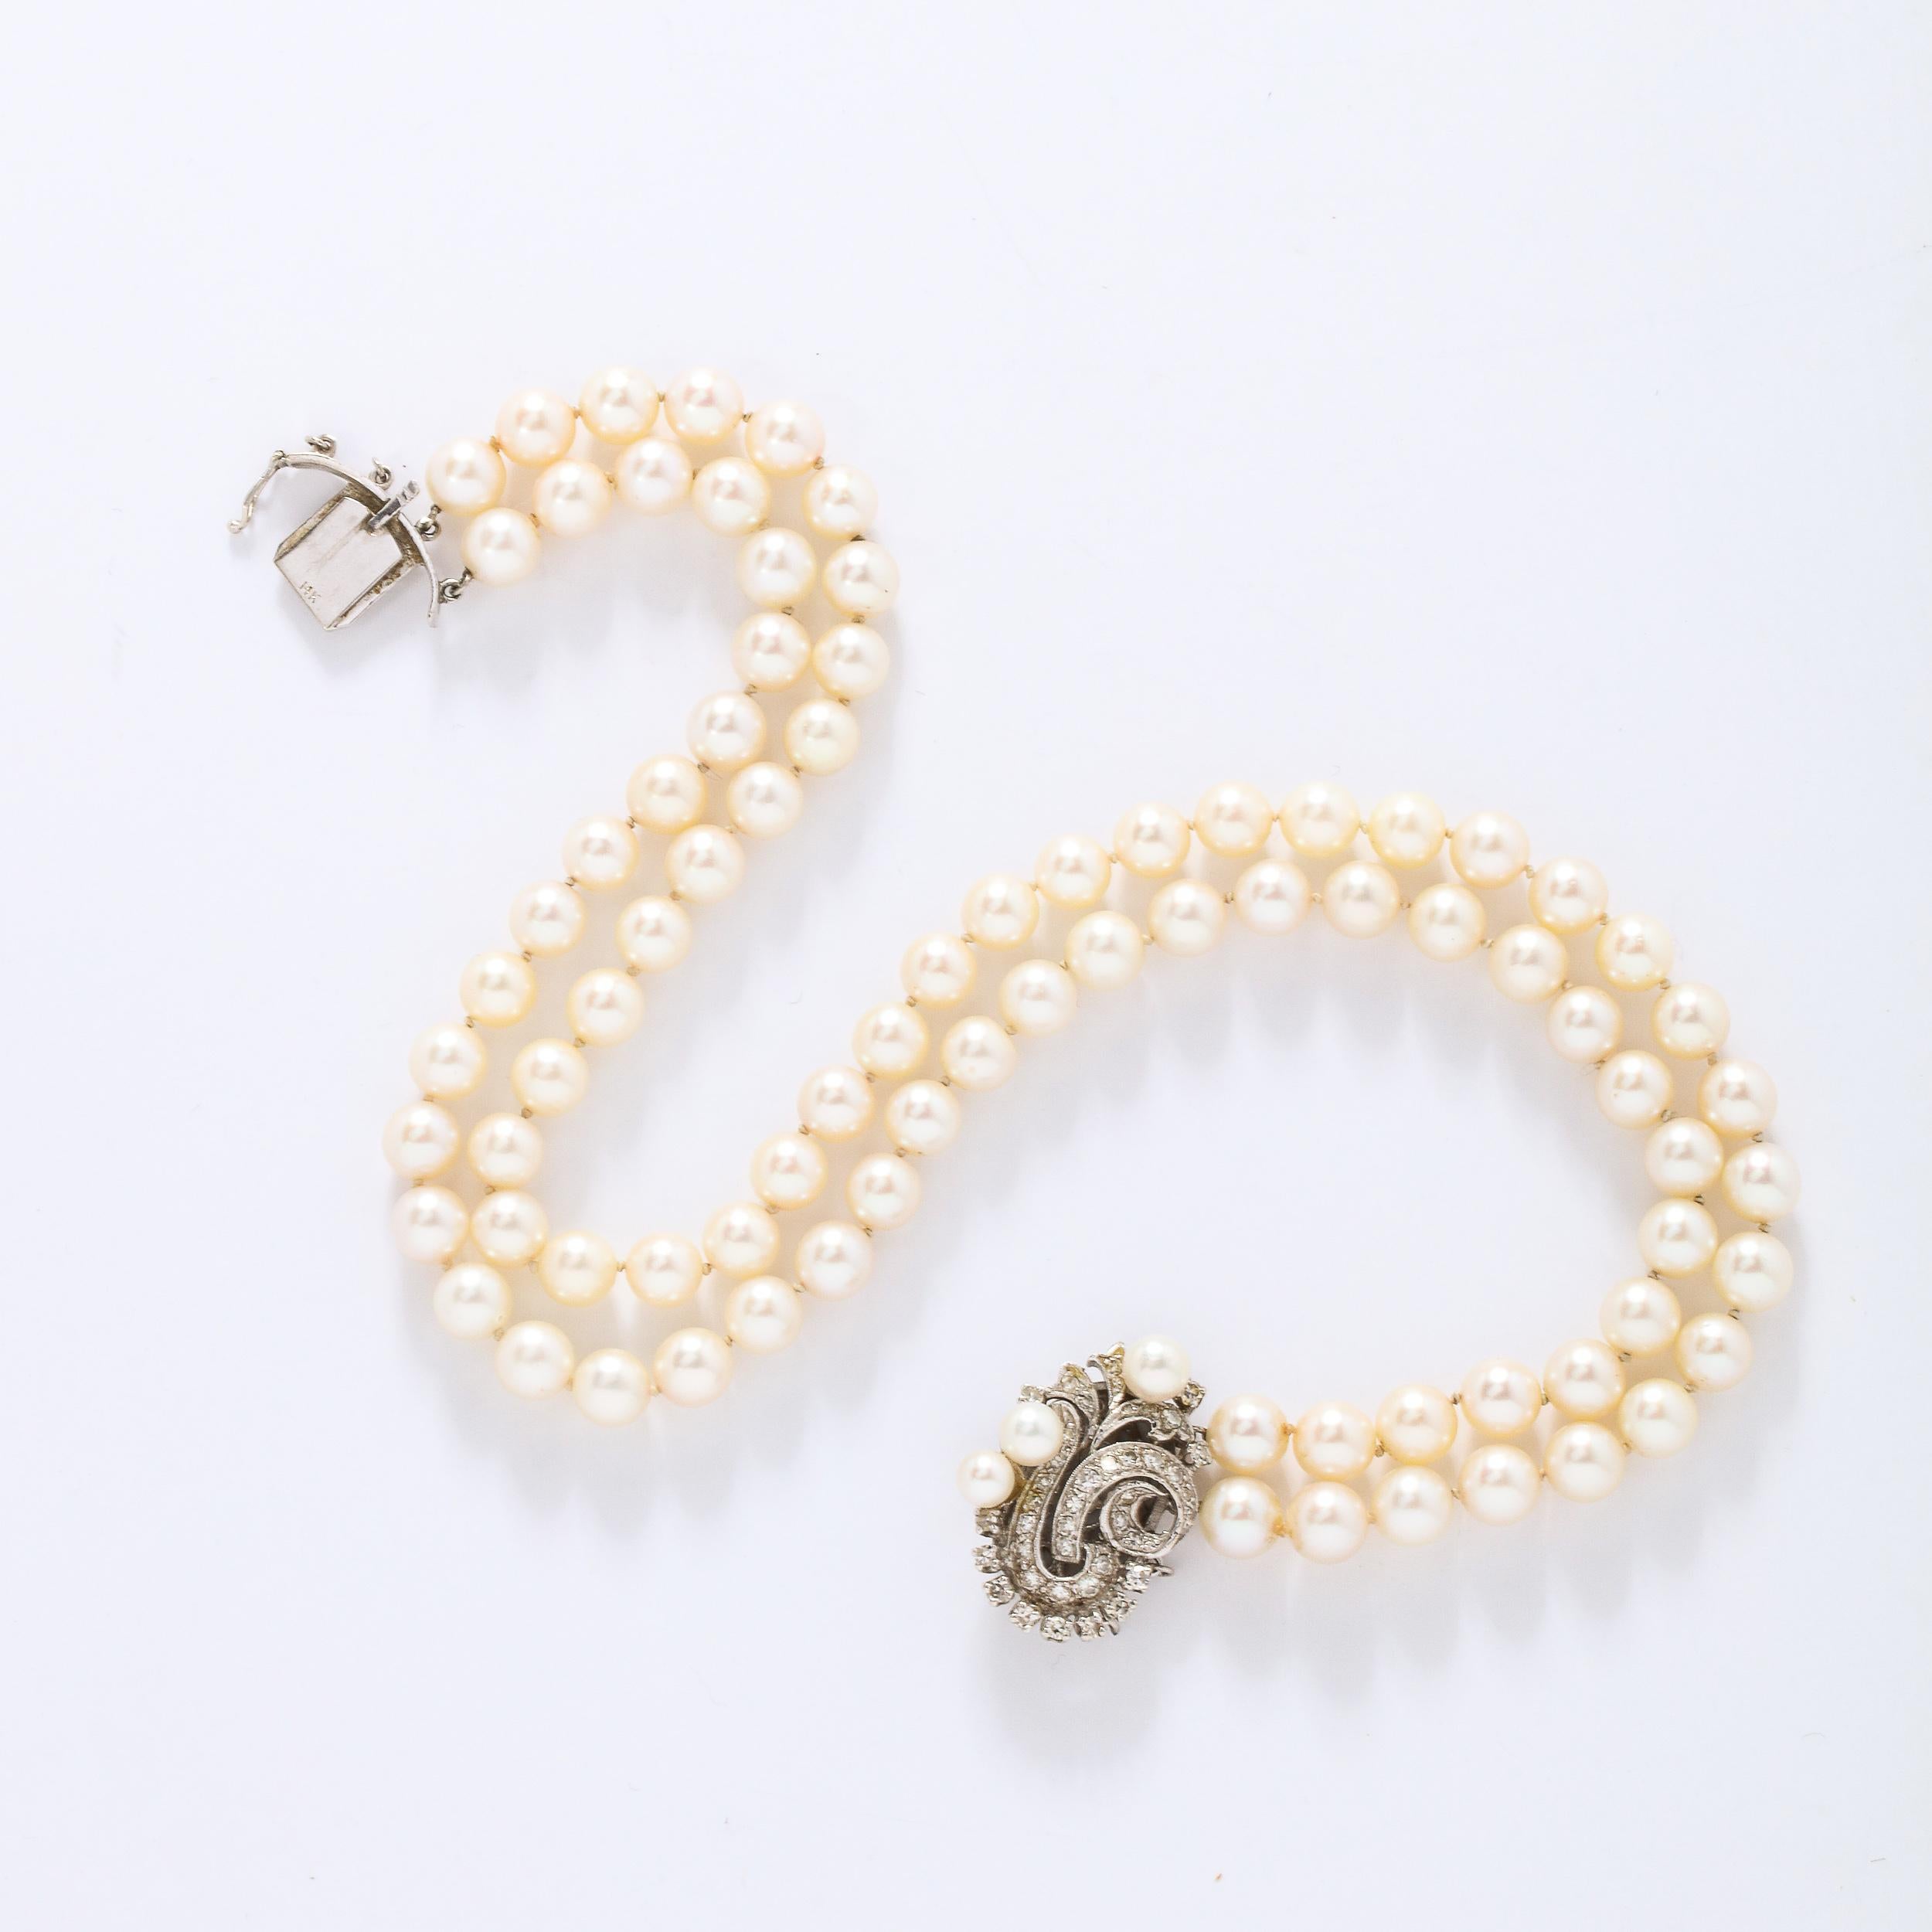 Brilliant Cut Art Deco Double Strand Pearl Necklace with 14kt Gold, Diamond and Pearl Clasp For Sale